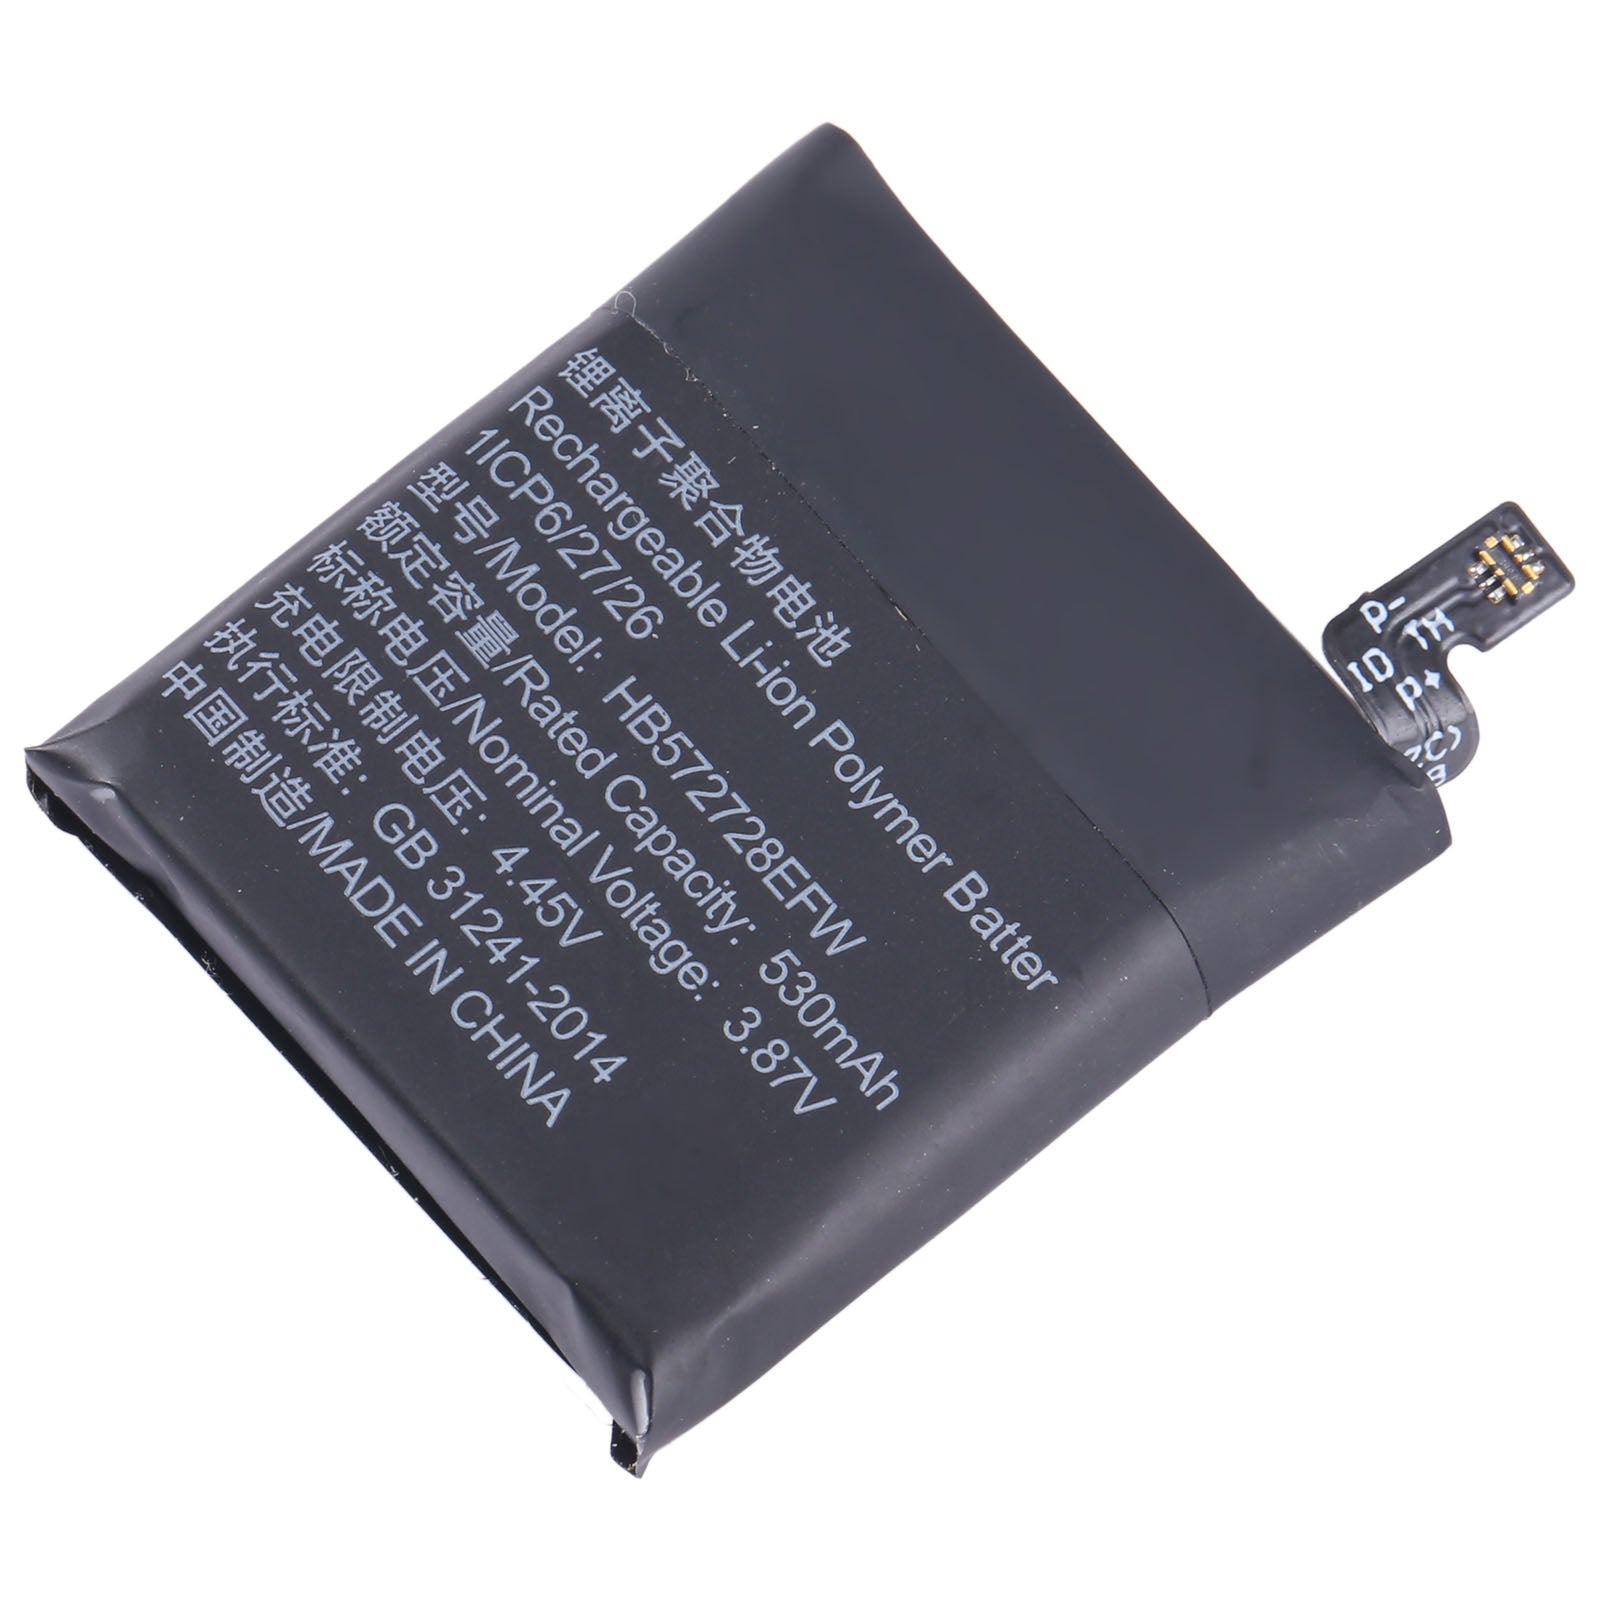 Replacement Battery For Huawei GT 3 Pro 46mm - HB572728EFW